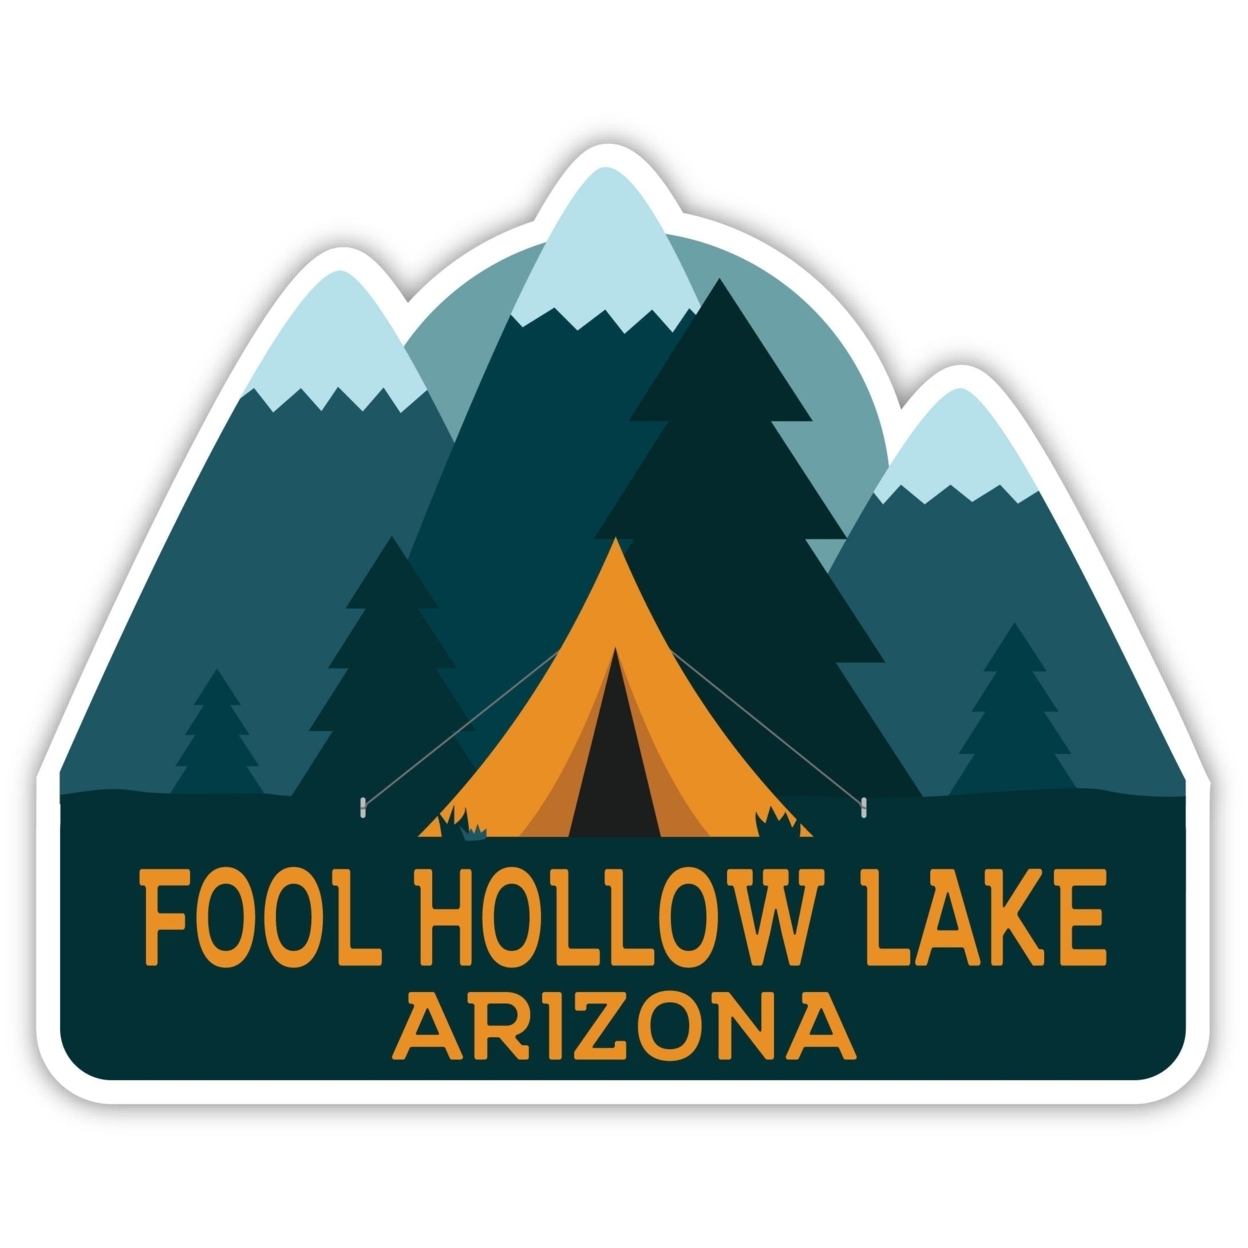 Fool Hollow Lake Arizona Souvenir Decorative Stickers (Choose Theme And Size) - 4-Pack, 2-Inch, Tent